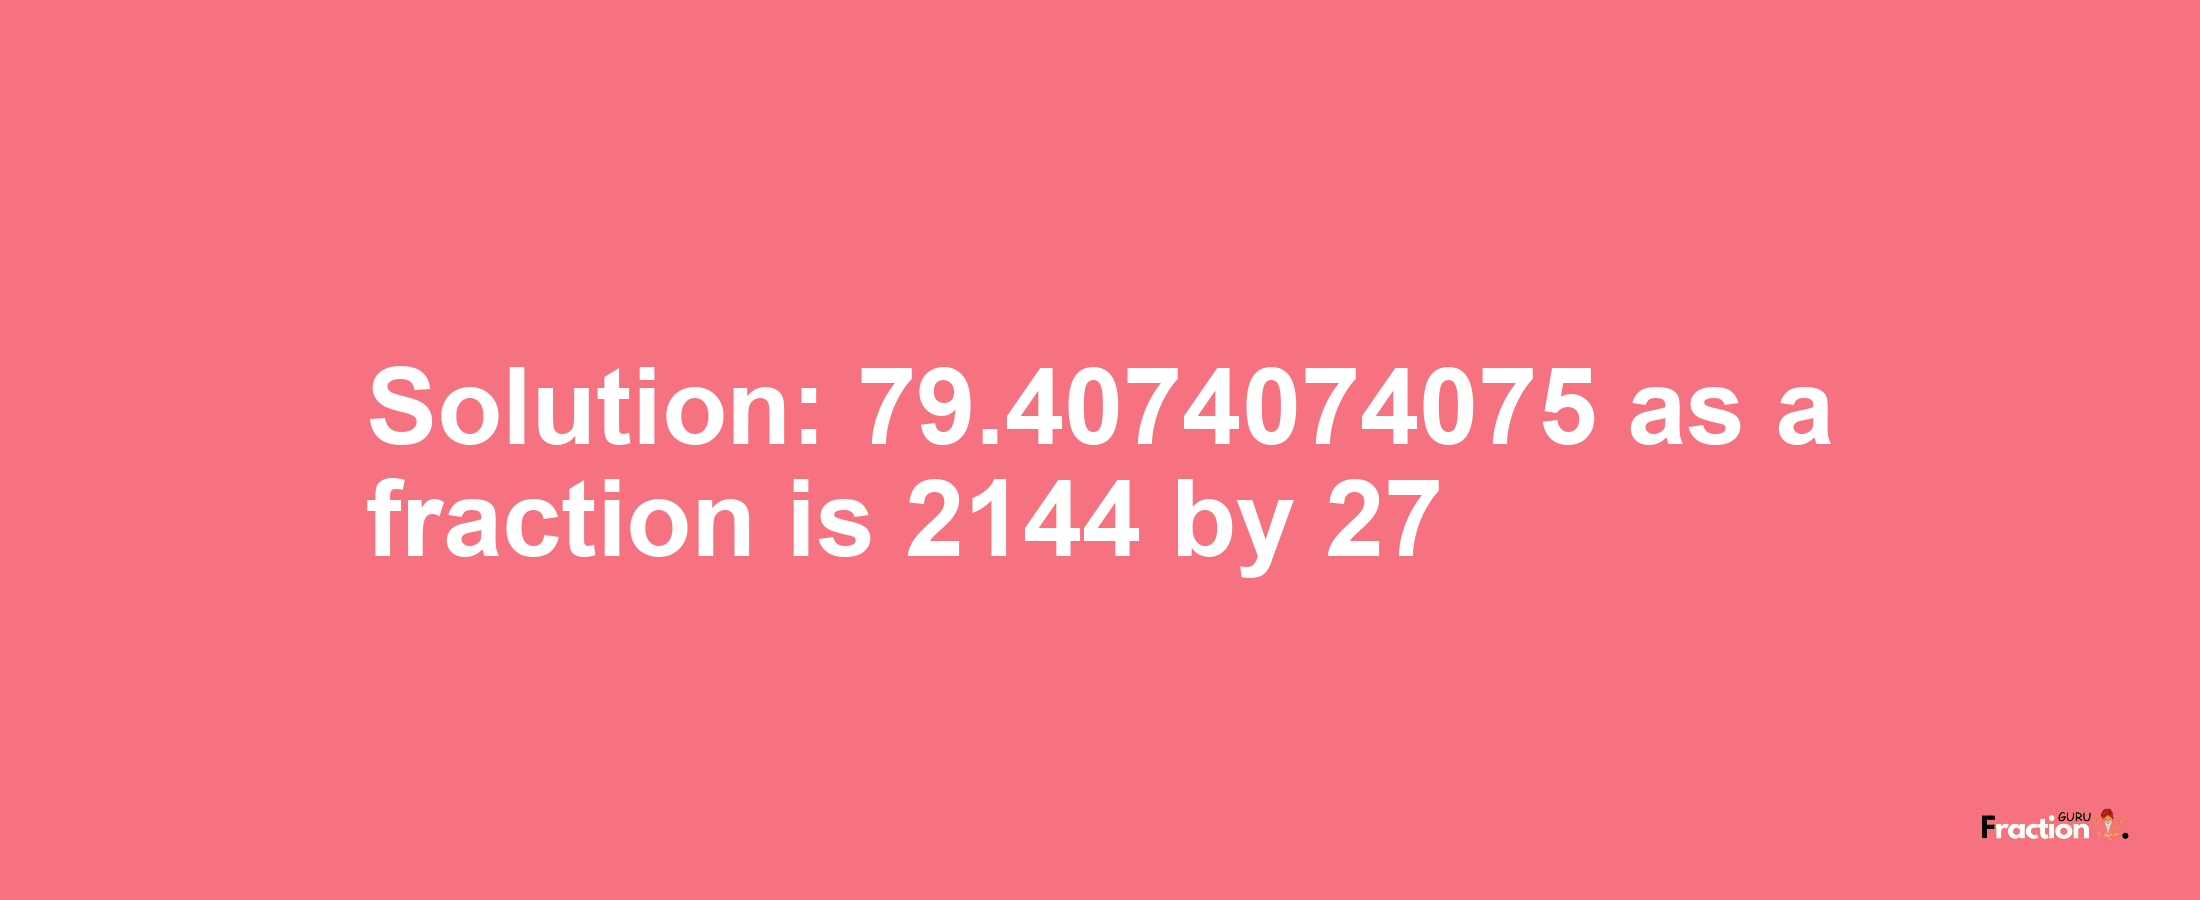 Solution:79.4074074075 as a fraction is 2144/27